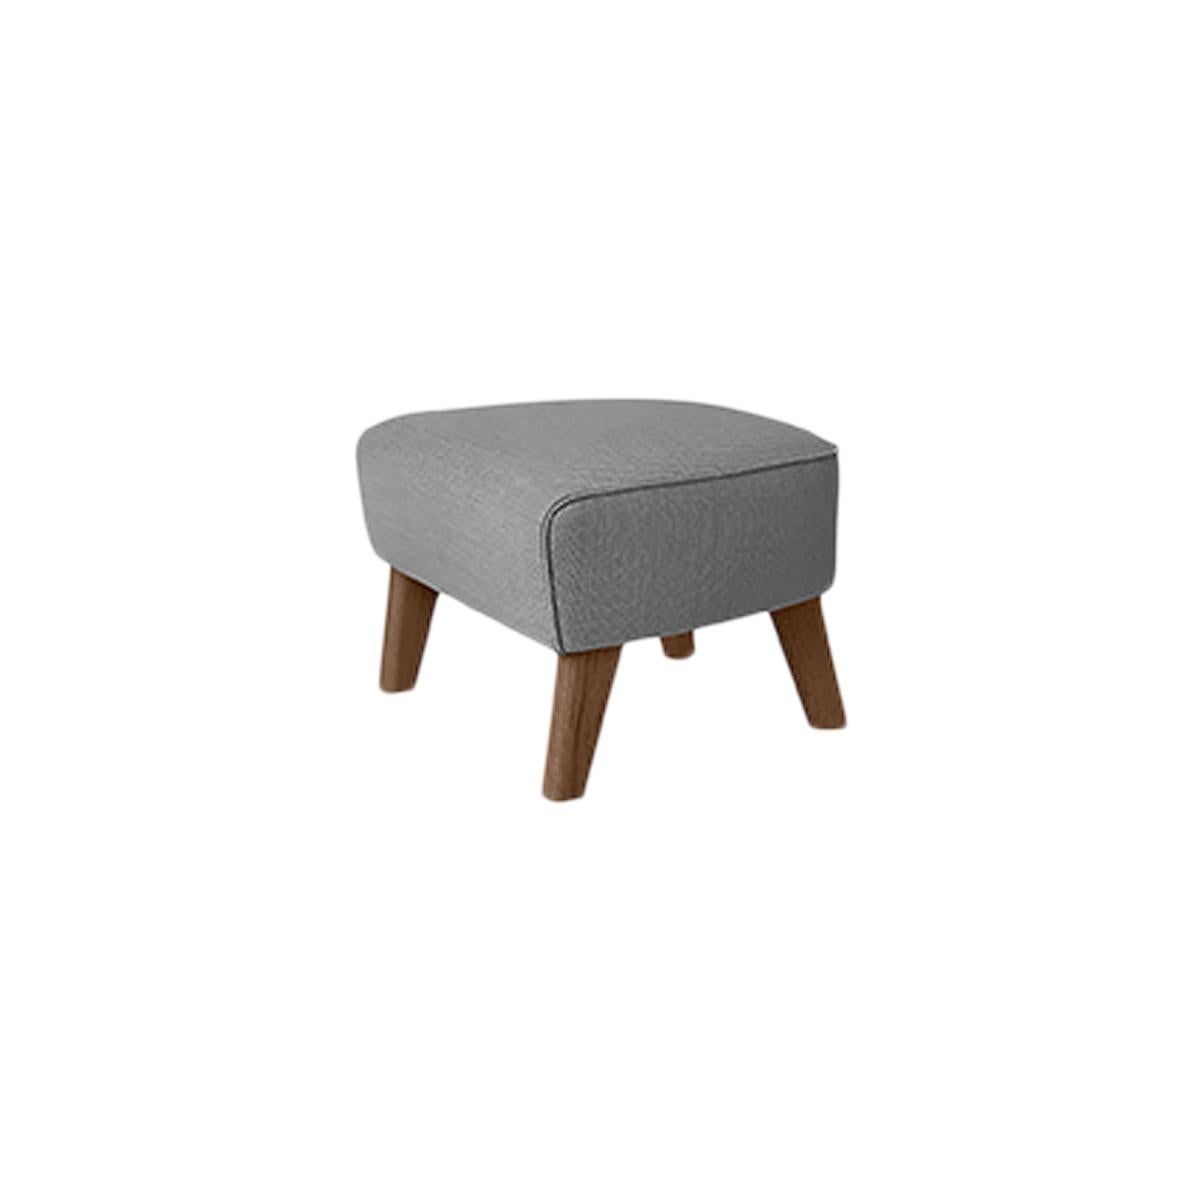 Grey and smoked Oak Raf Simons Vidar 3 My Own Chair footstool by Lassen
Dimensions: w 56 x d 58 x h 40 cm 
Materials: Textile
Also Available: Other colors available.

The My Own Chair Footstool has been designed in the same spirit as Flemming